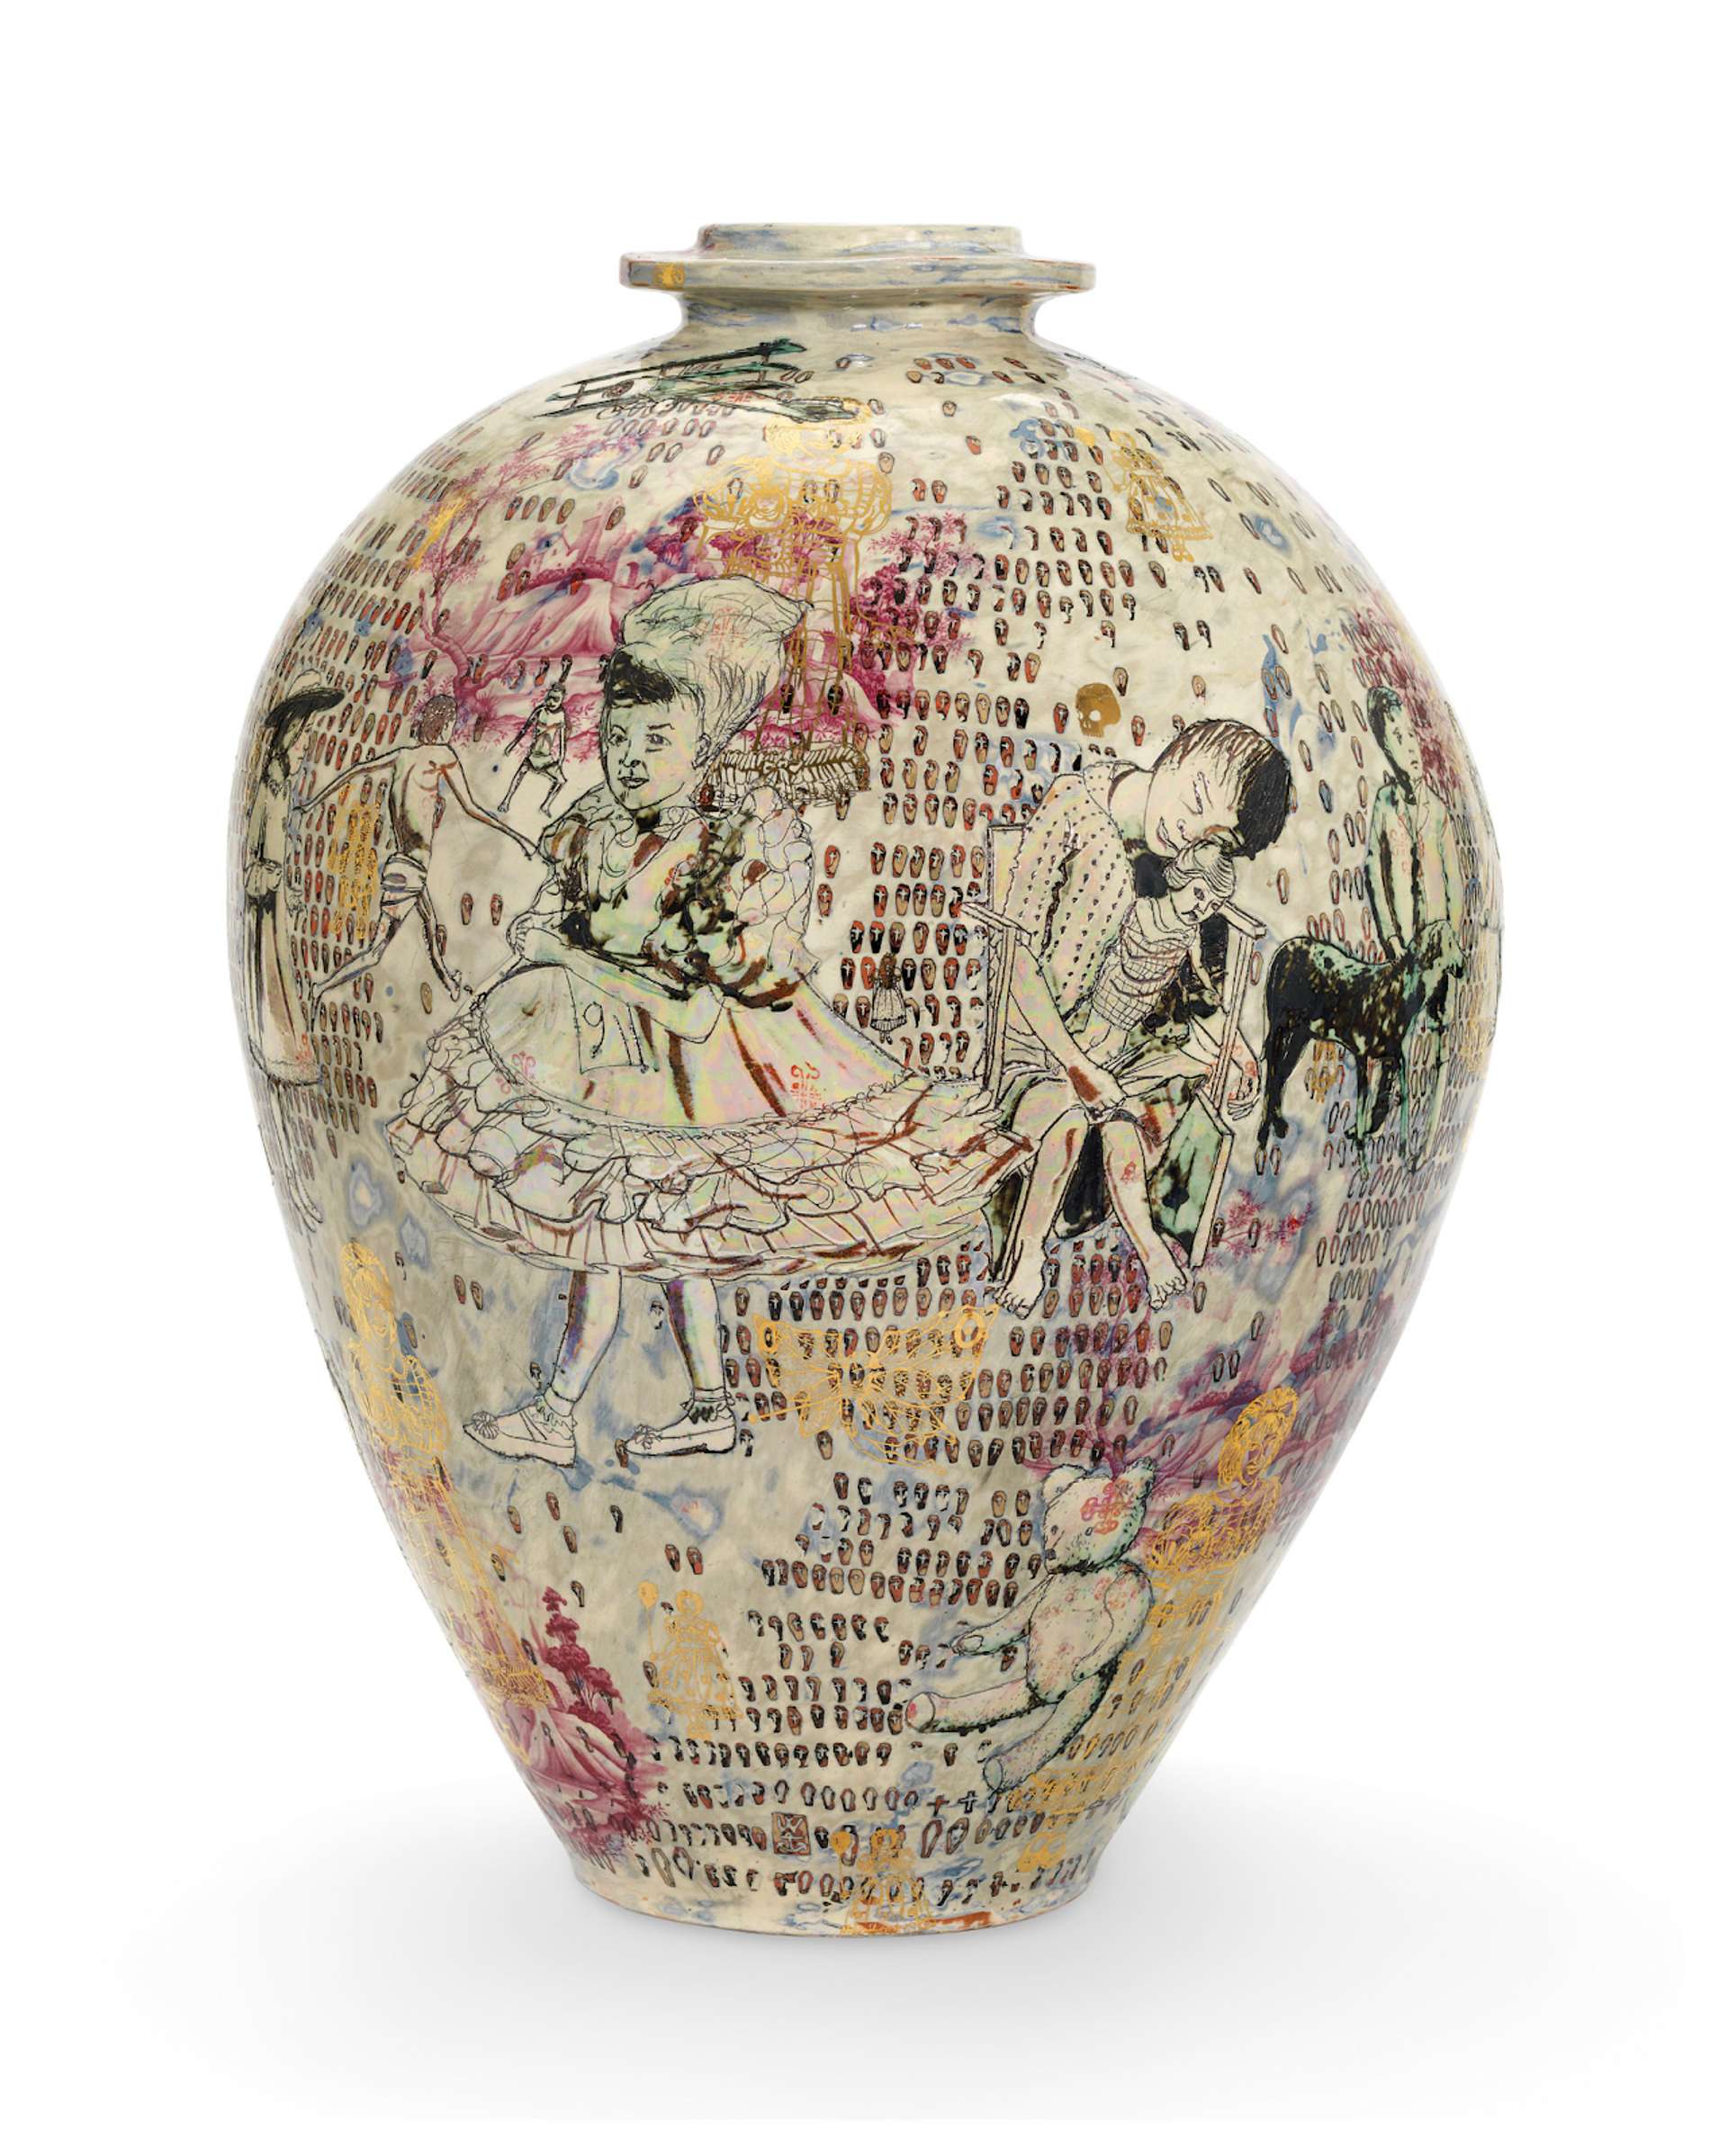 A ceramic vase by Grayson Perry with pink, yellow and blue hues. Two children are etched onto the vase: one with a dress on and the other slumped in a chair with a doll. A teddy bear is also etched in the bottom corner.